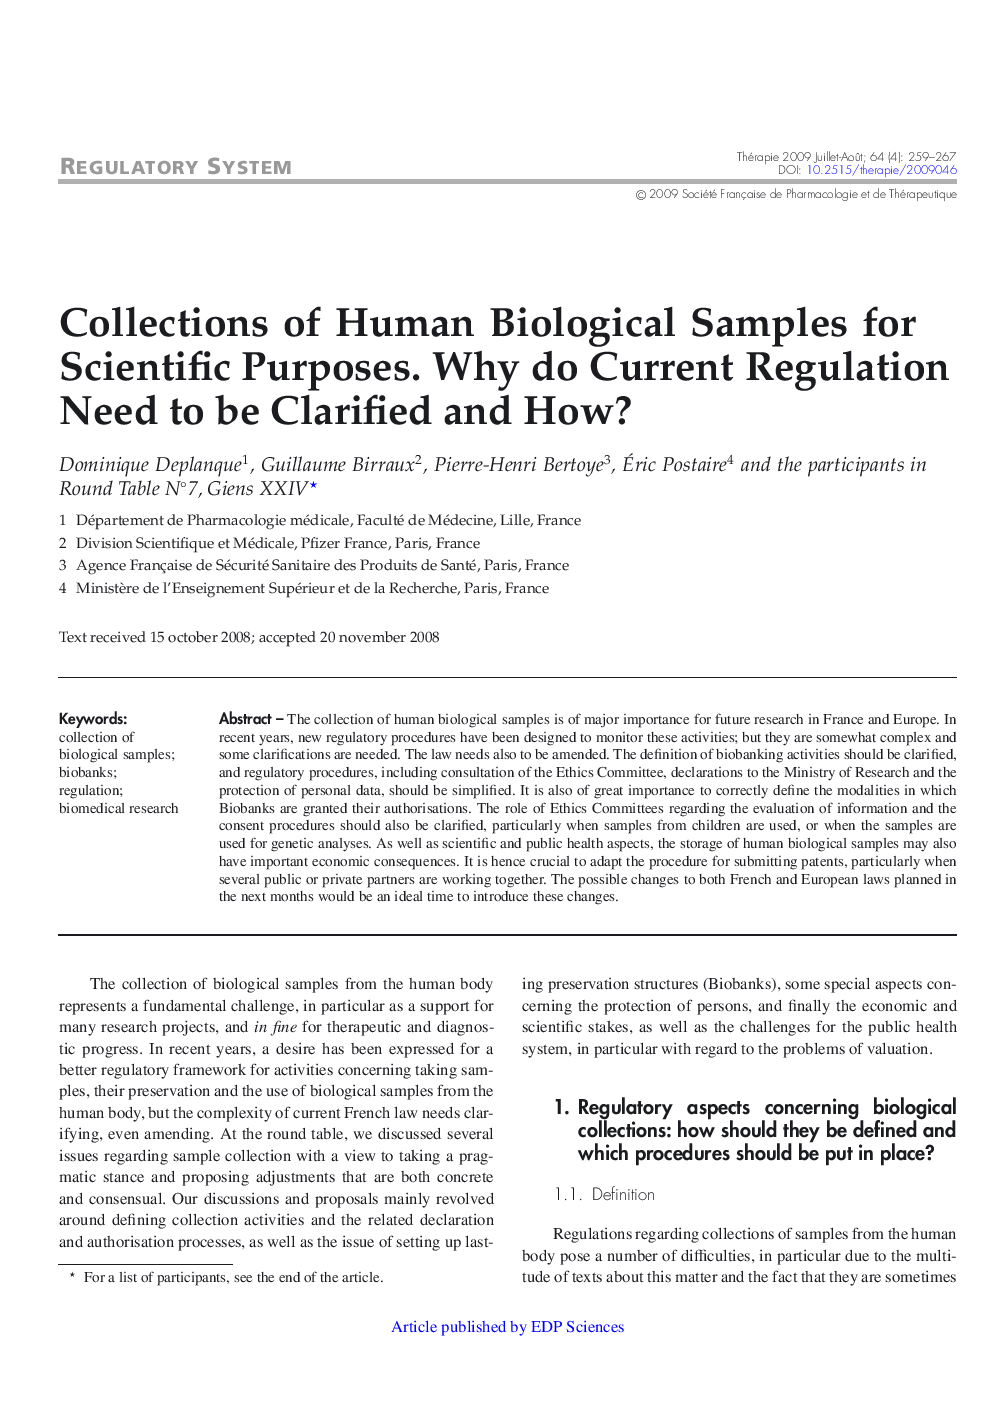 Collections of Human Biological Samples for Scientific Purposes. Why do Current Regulation Need to be Clarified and How?